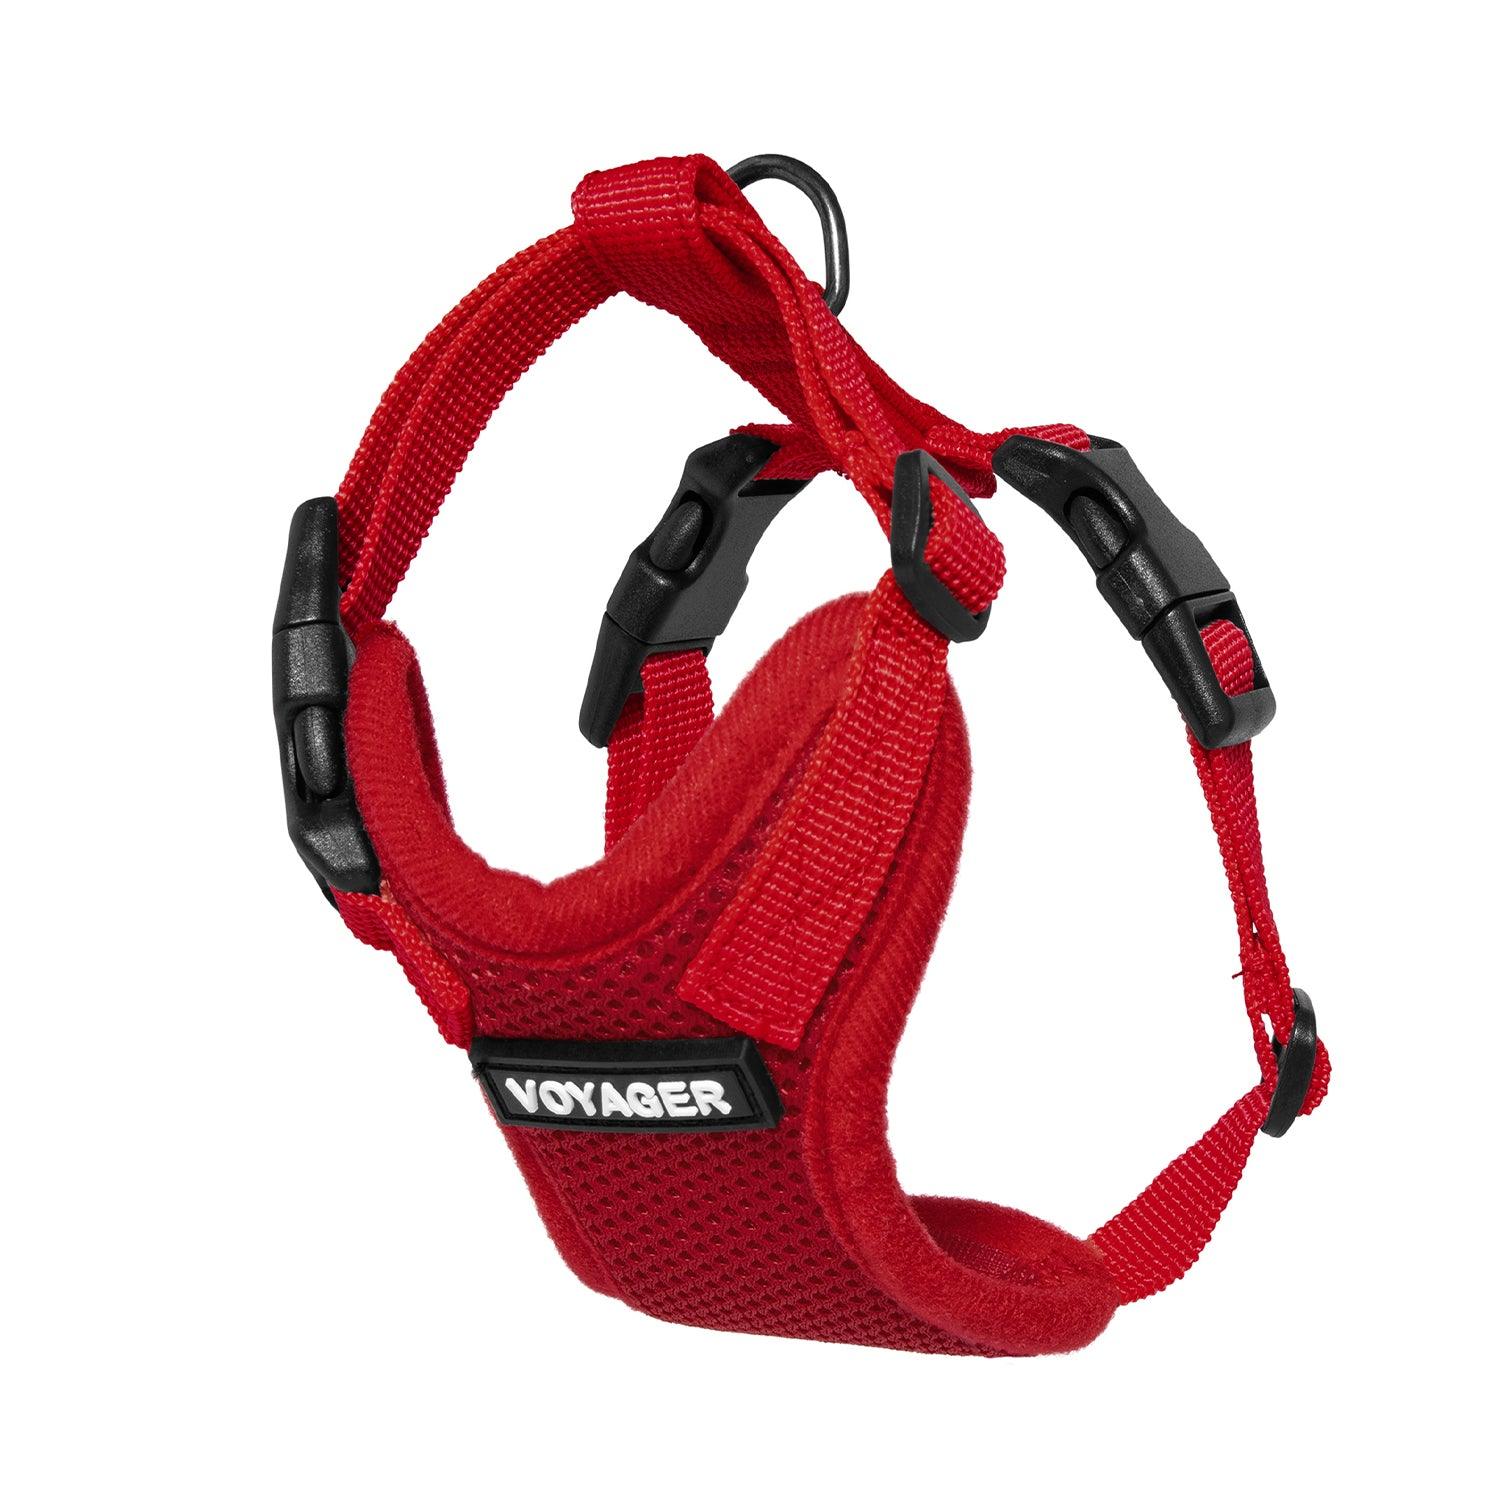 Step-In Lock Harness & Leash Set - VOYAGER Dog Harnesses